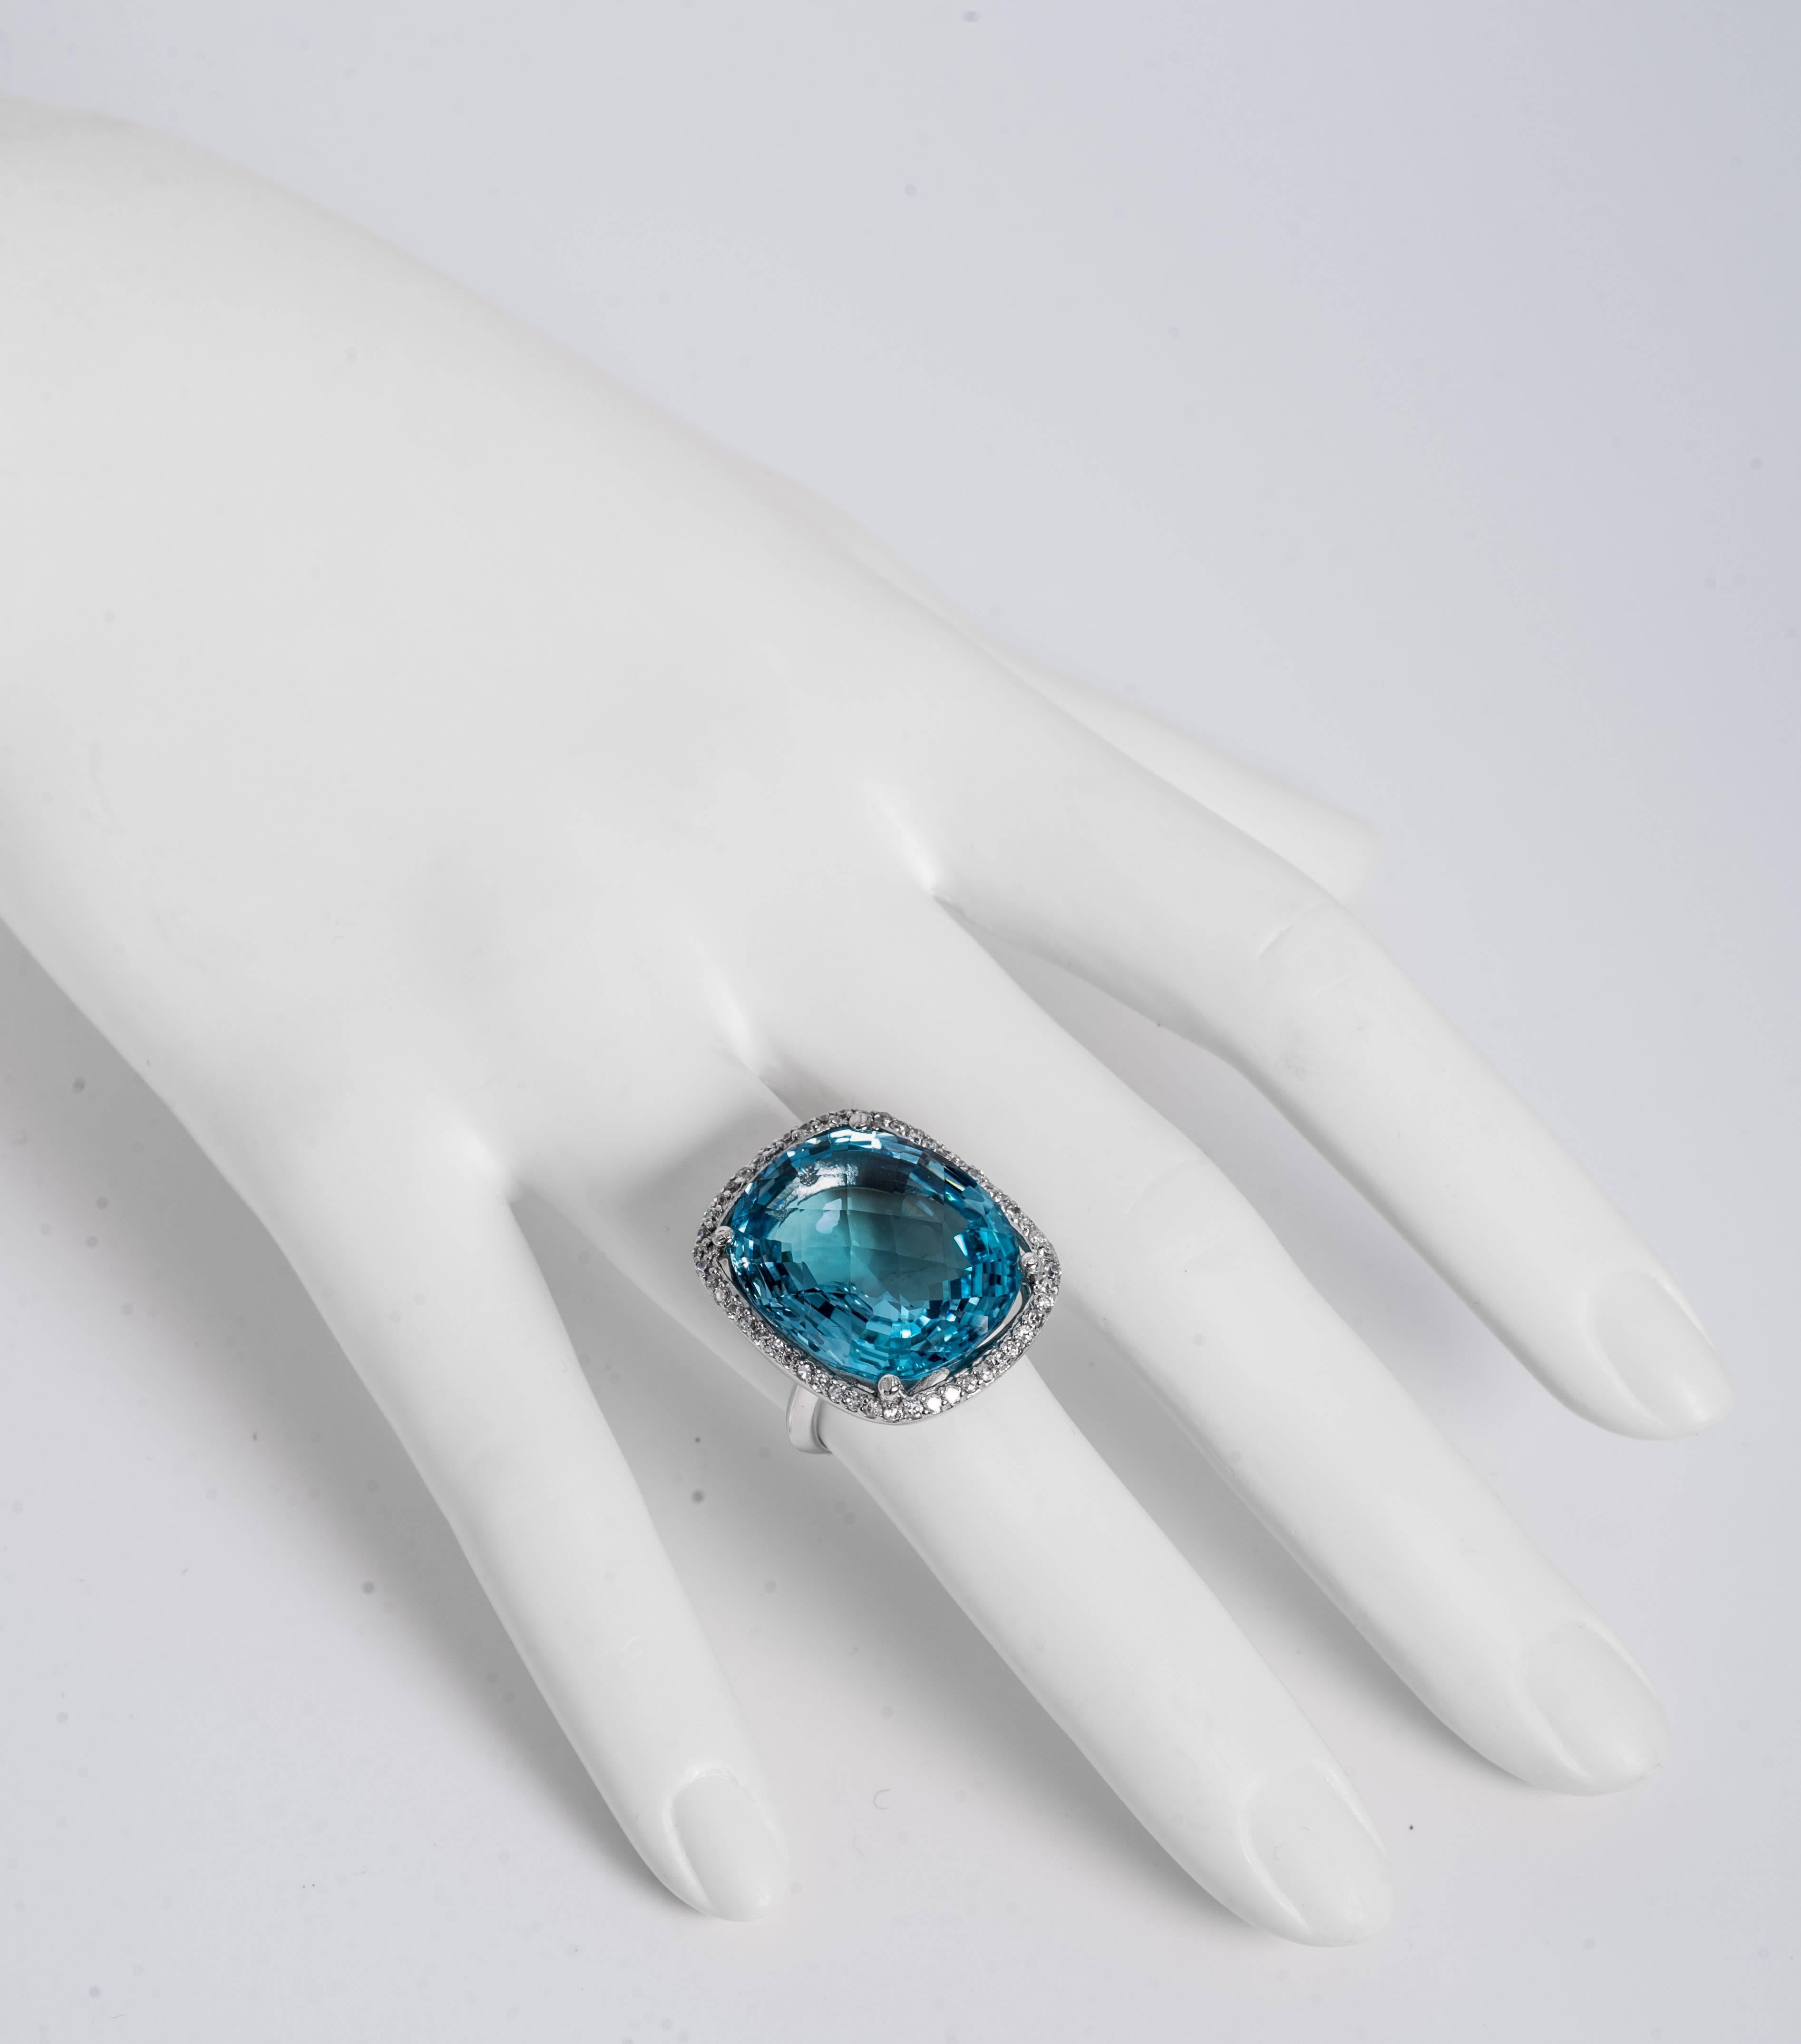 Wonderful Swiss blue faceted topaz faux diamond cocktail ring set in sterling. Can sized complimentary. Measures 1inch length and 3/4inch across